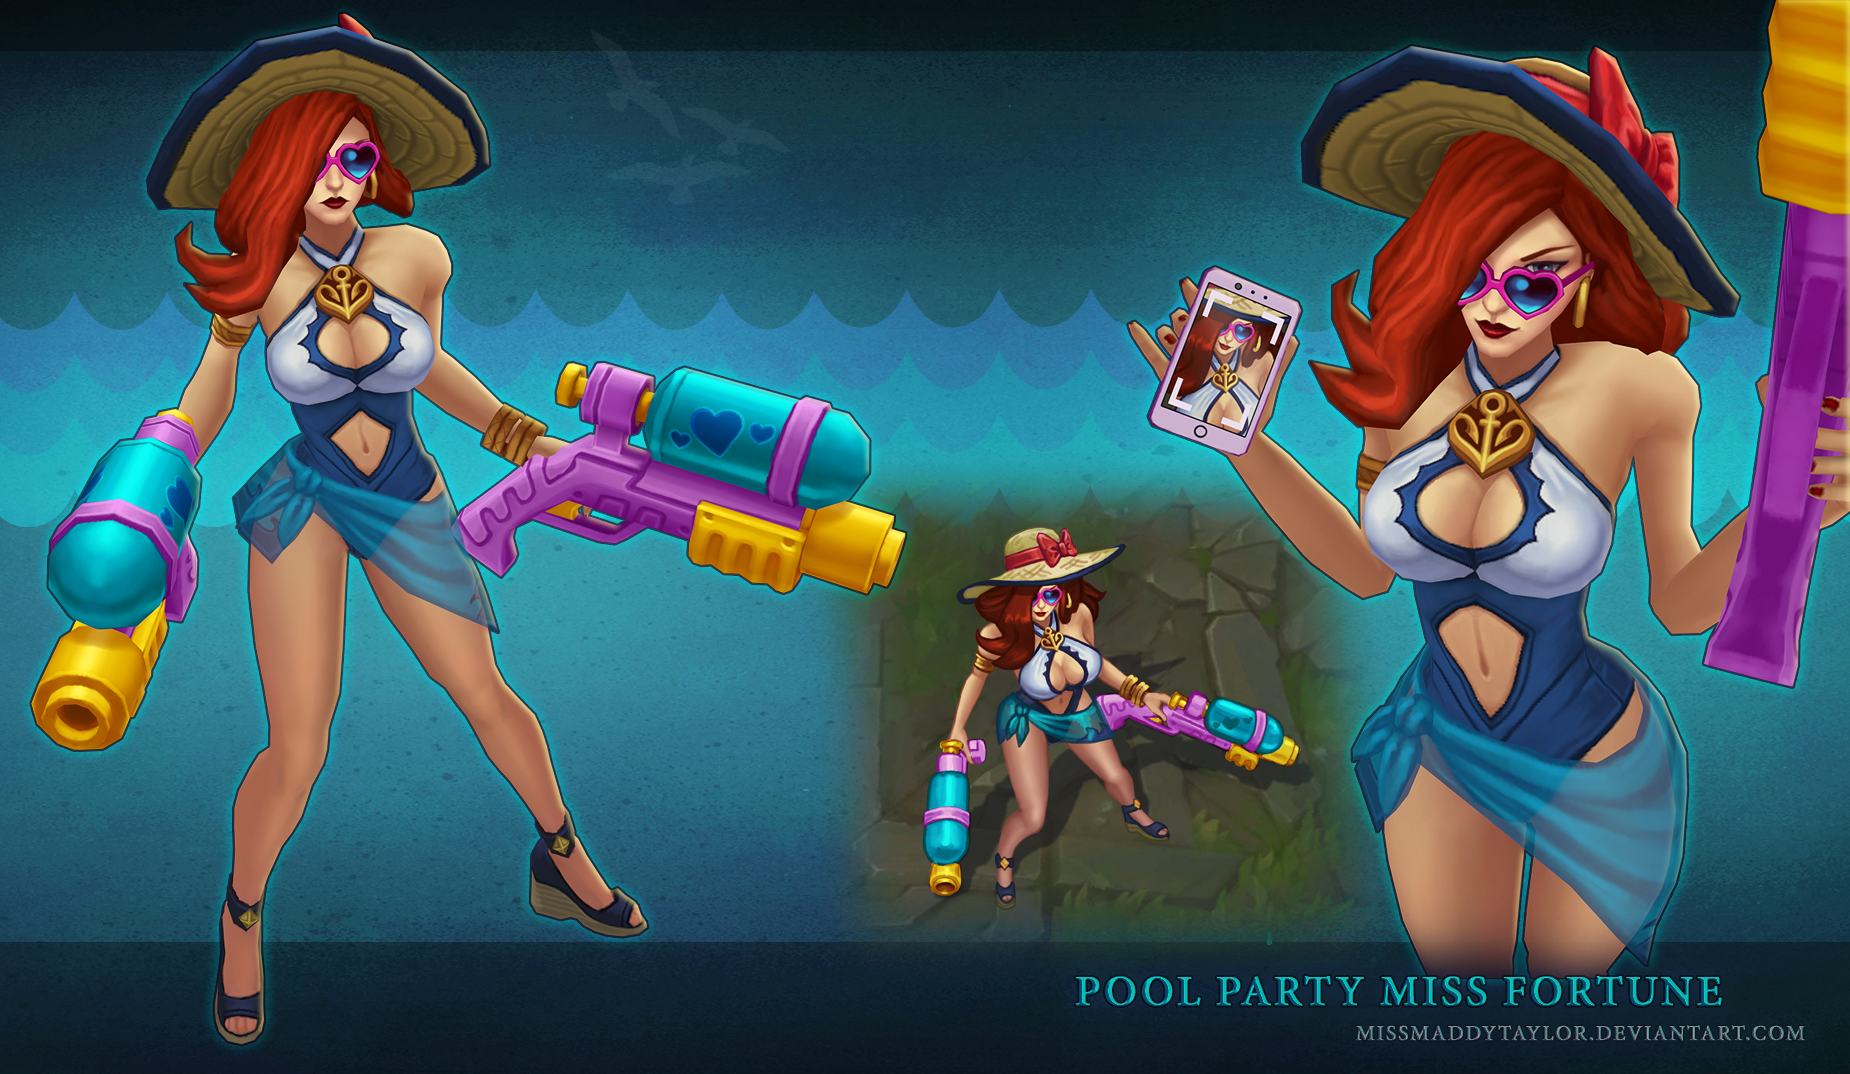 Pool Party Lulu - League of Legends (with video!) by KNKL on DeviantArt